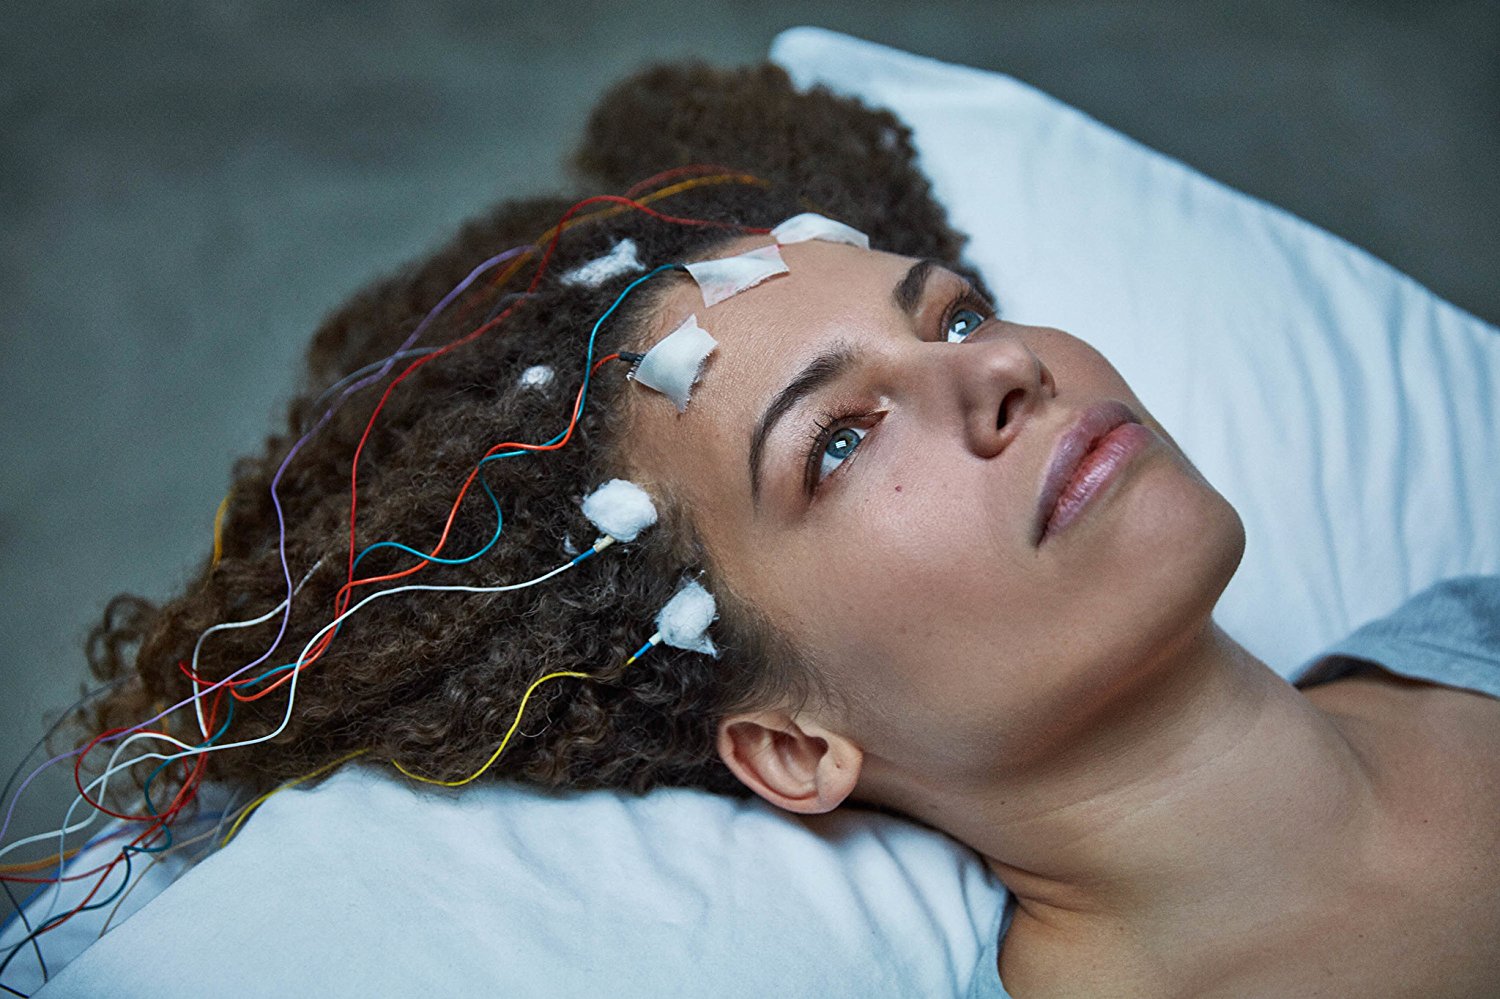 UNREST: A Brave, Personal Look at Invisible Illness